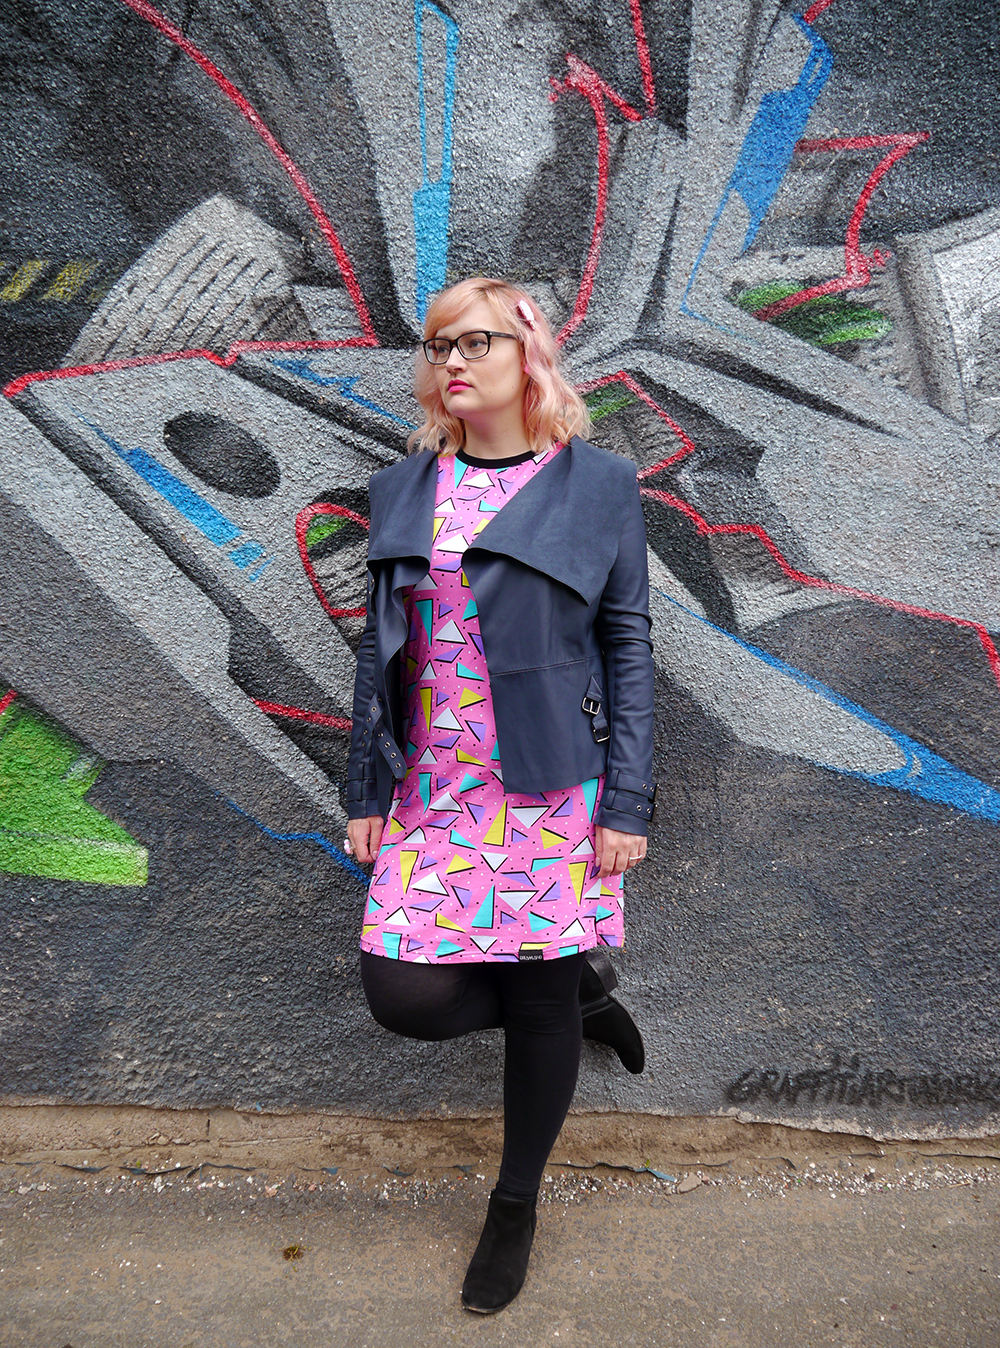 Dreamland Duplex print dress, Saved by the Bell style, pom pom earrings, Alternate Normality candyfloss hairclip, River Island leather jacket, street style with graffiti